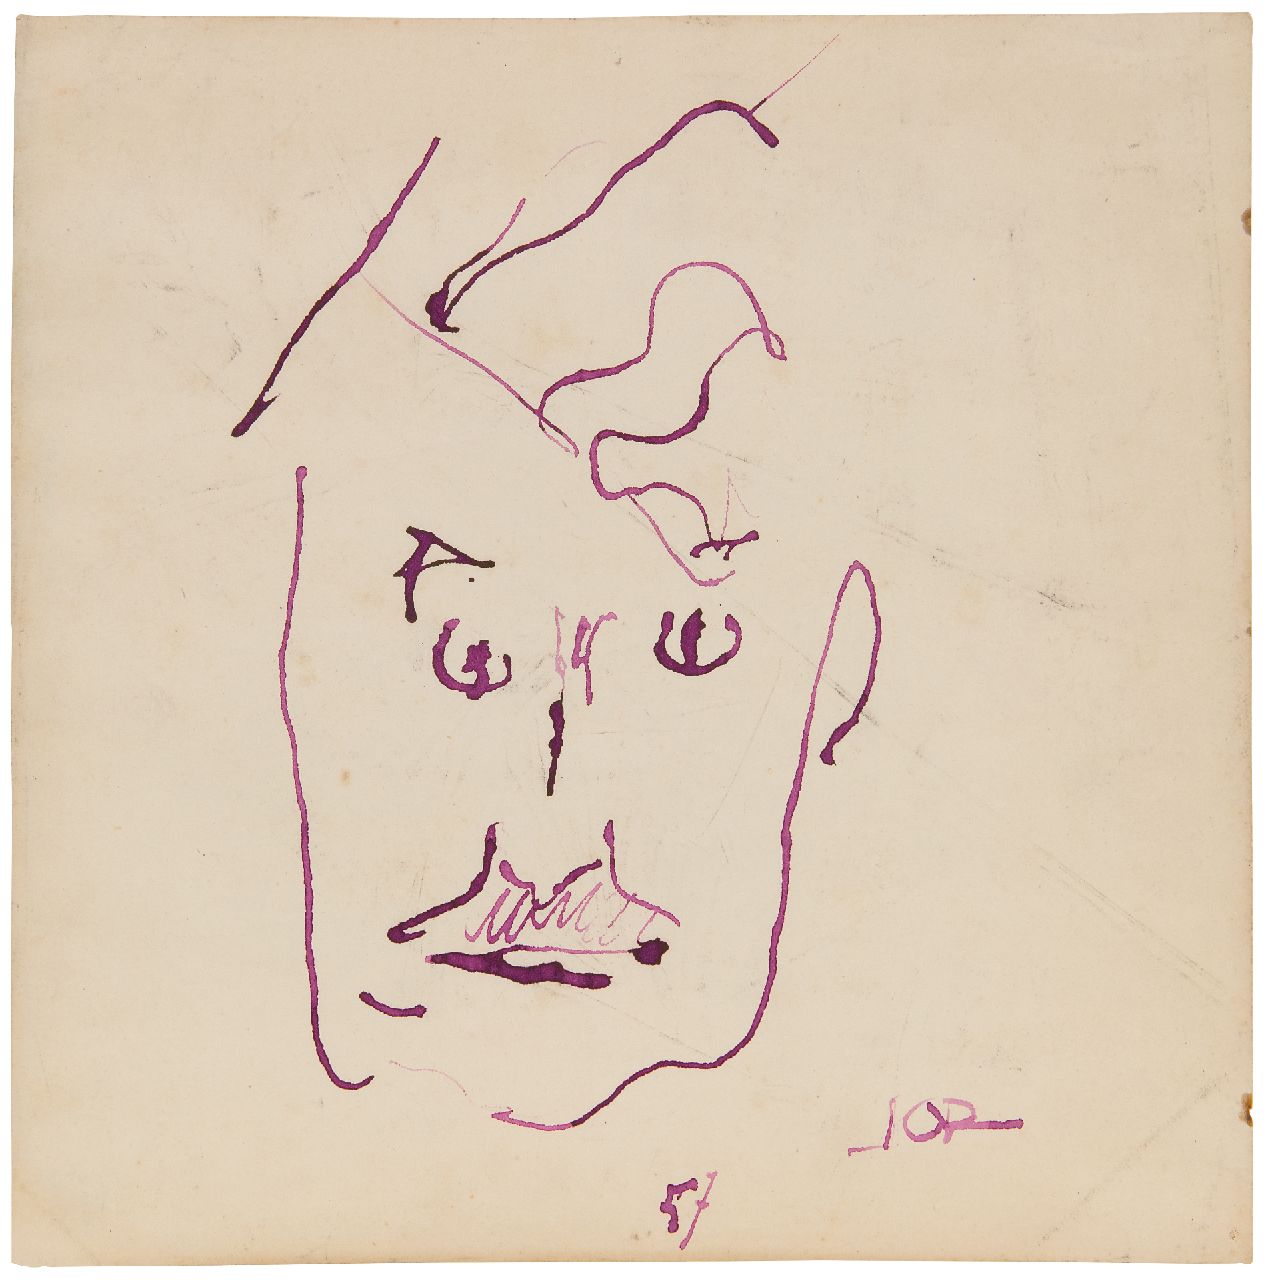 Jordens J.G.  | 'Jan' Gerrit Jordens | Watercolours and drawings offered for sale | Self portrait of the artist, ink on paper 26.7 x 26.4 cm, signed l.r. and dated '57